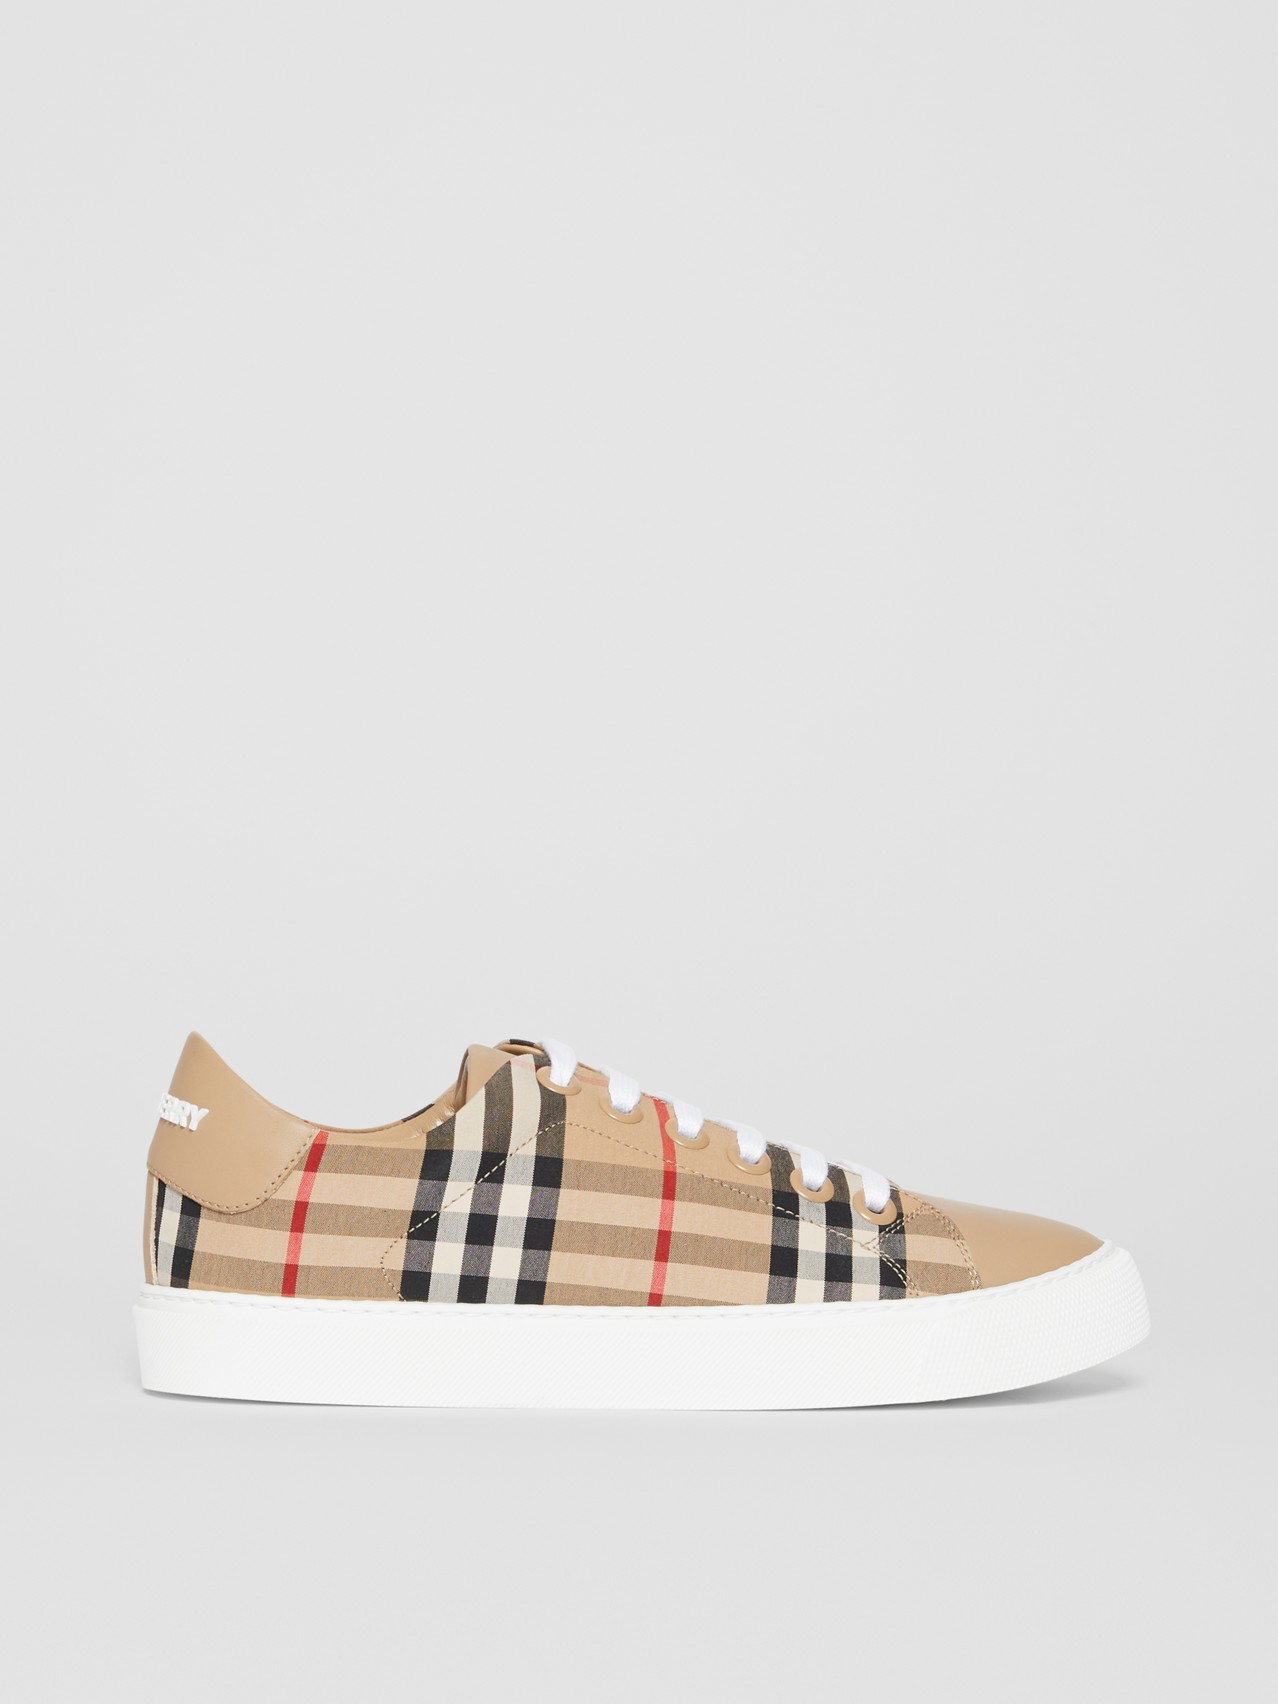 Vintage Check and Leather Sneakers by Burberry, available on burberry.com for $390 Gigi Hadid Shoes SIMILAR PRODUCT